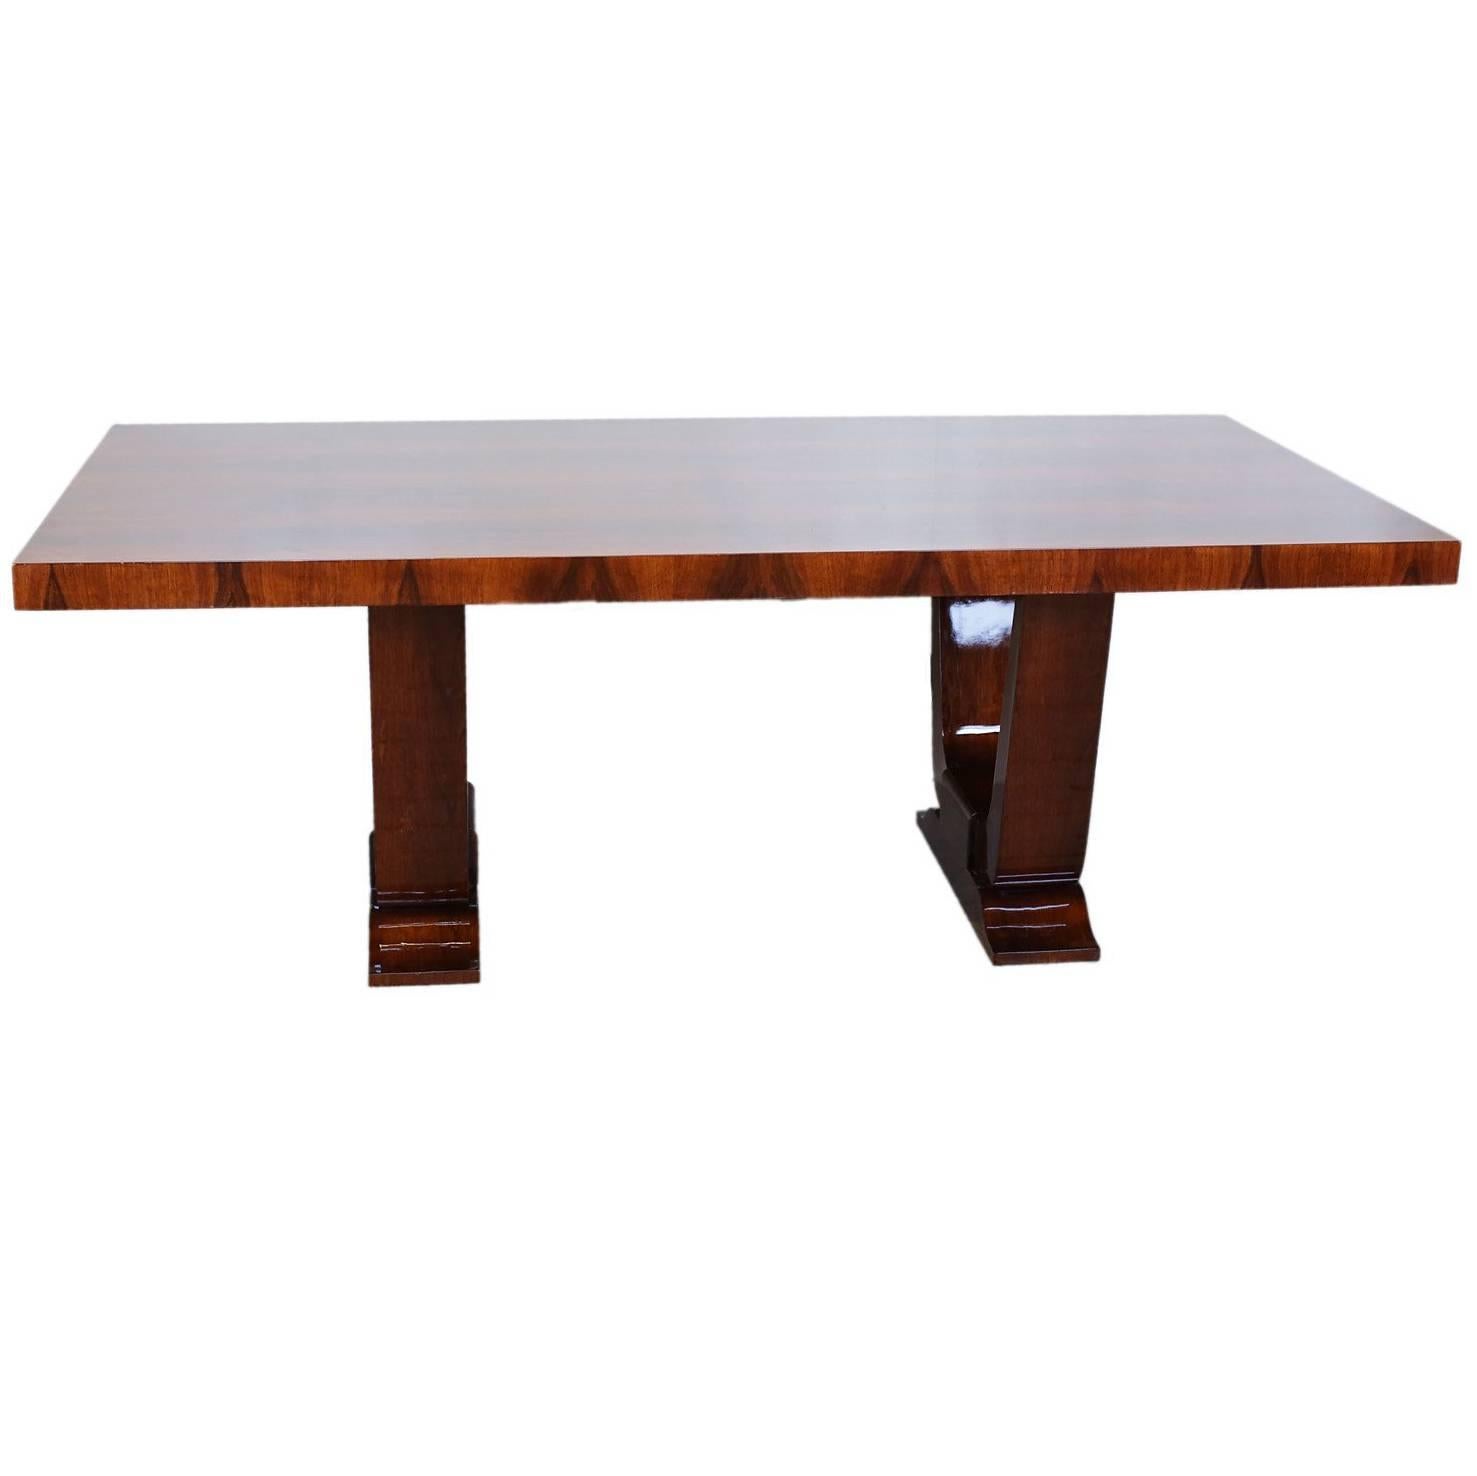 French Art Deco Walnut Dining Table, circa 1940s For Sale